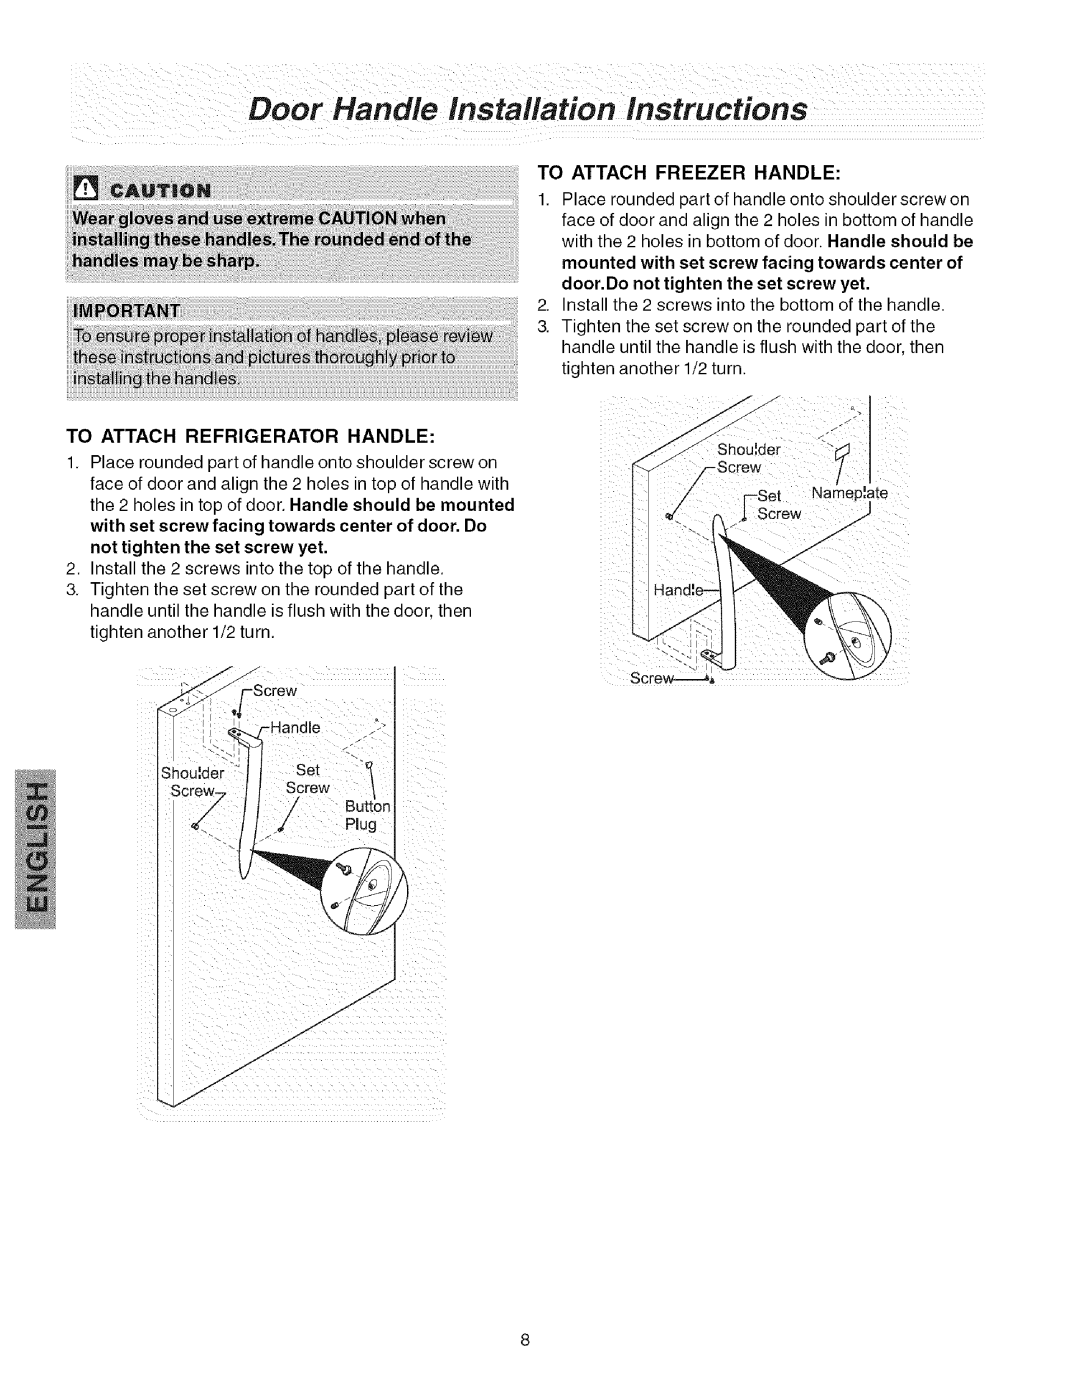 Kenmore 241858201 manual To Attach Freezer Handle, To Attach Refrigerator Handle 